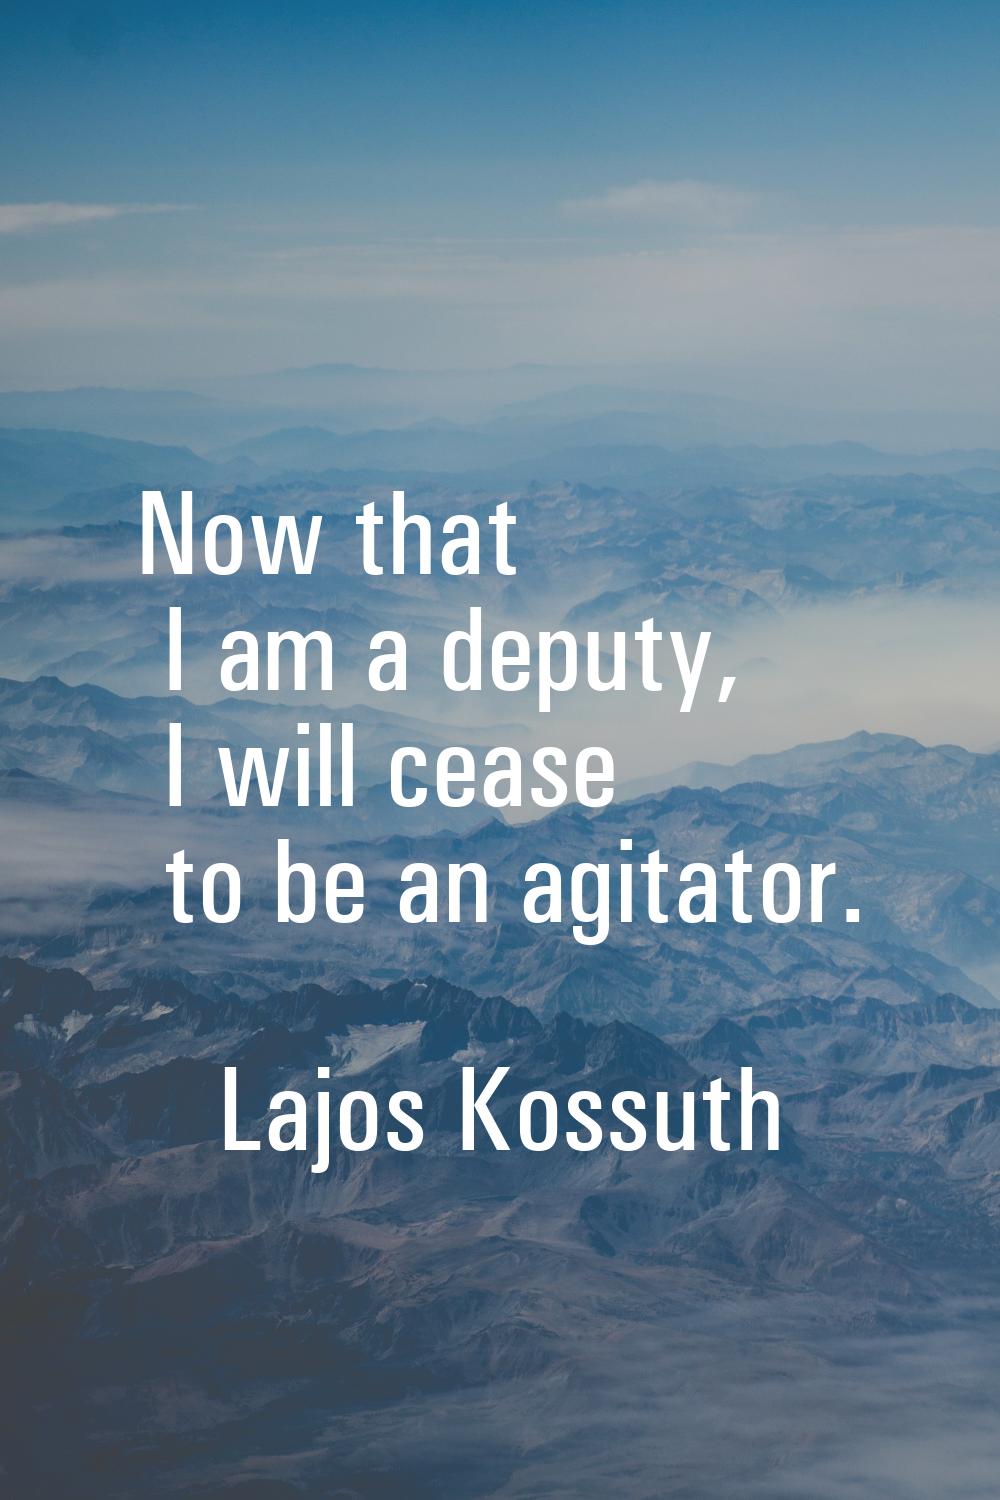 Now that I am a deputy, I will cease to be an agitator.